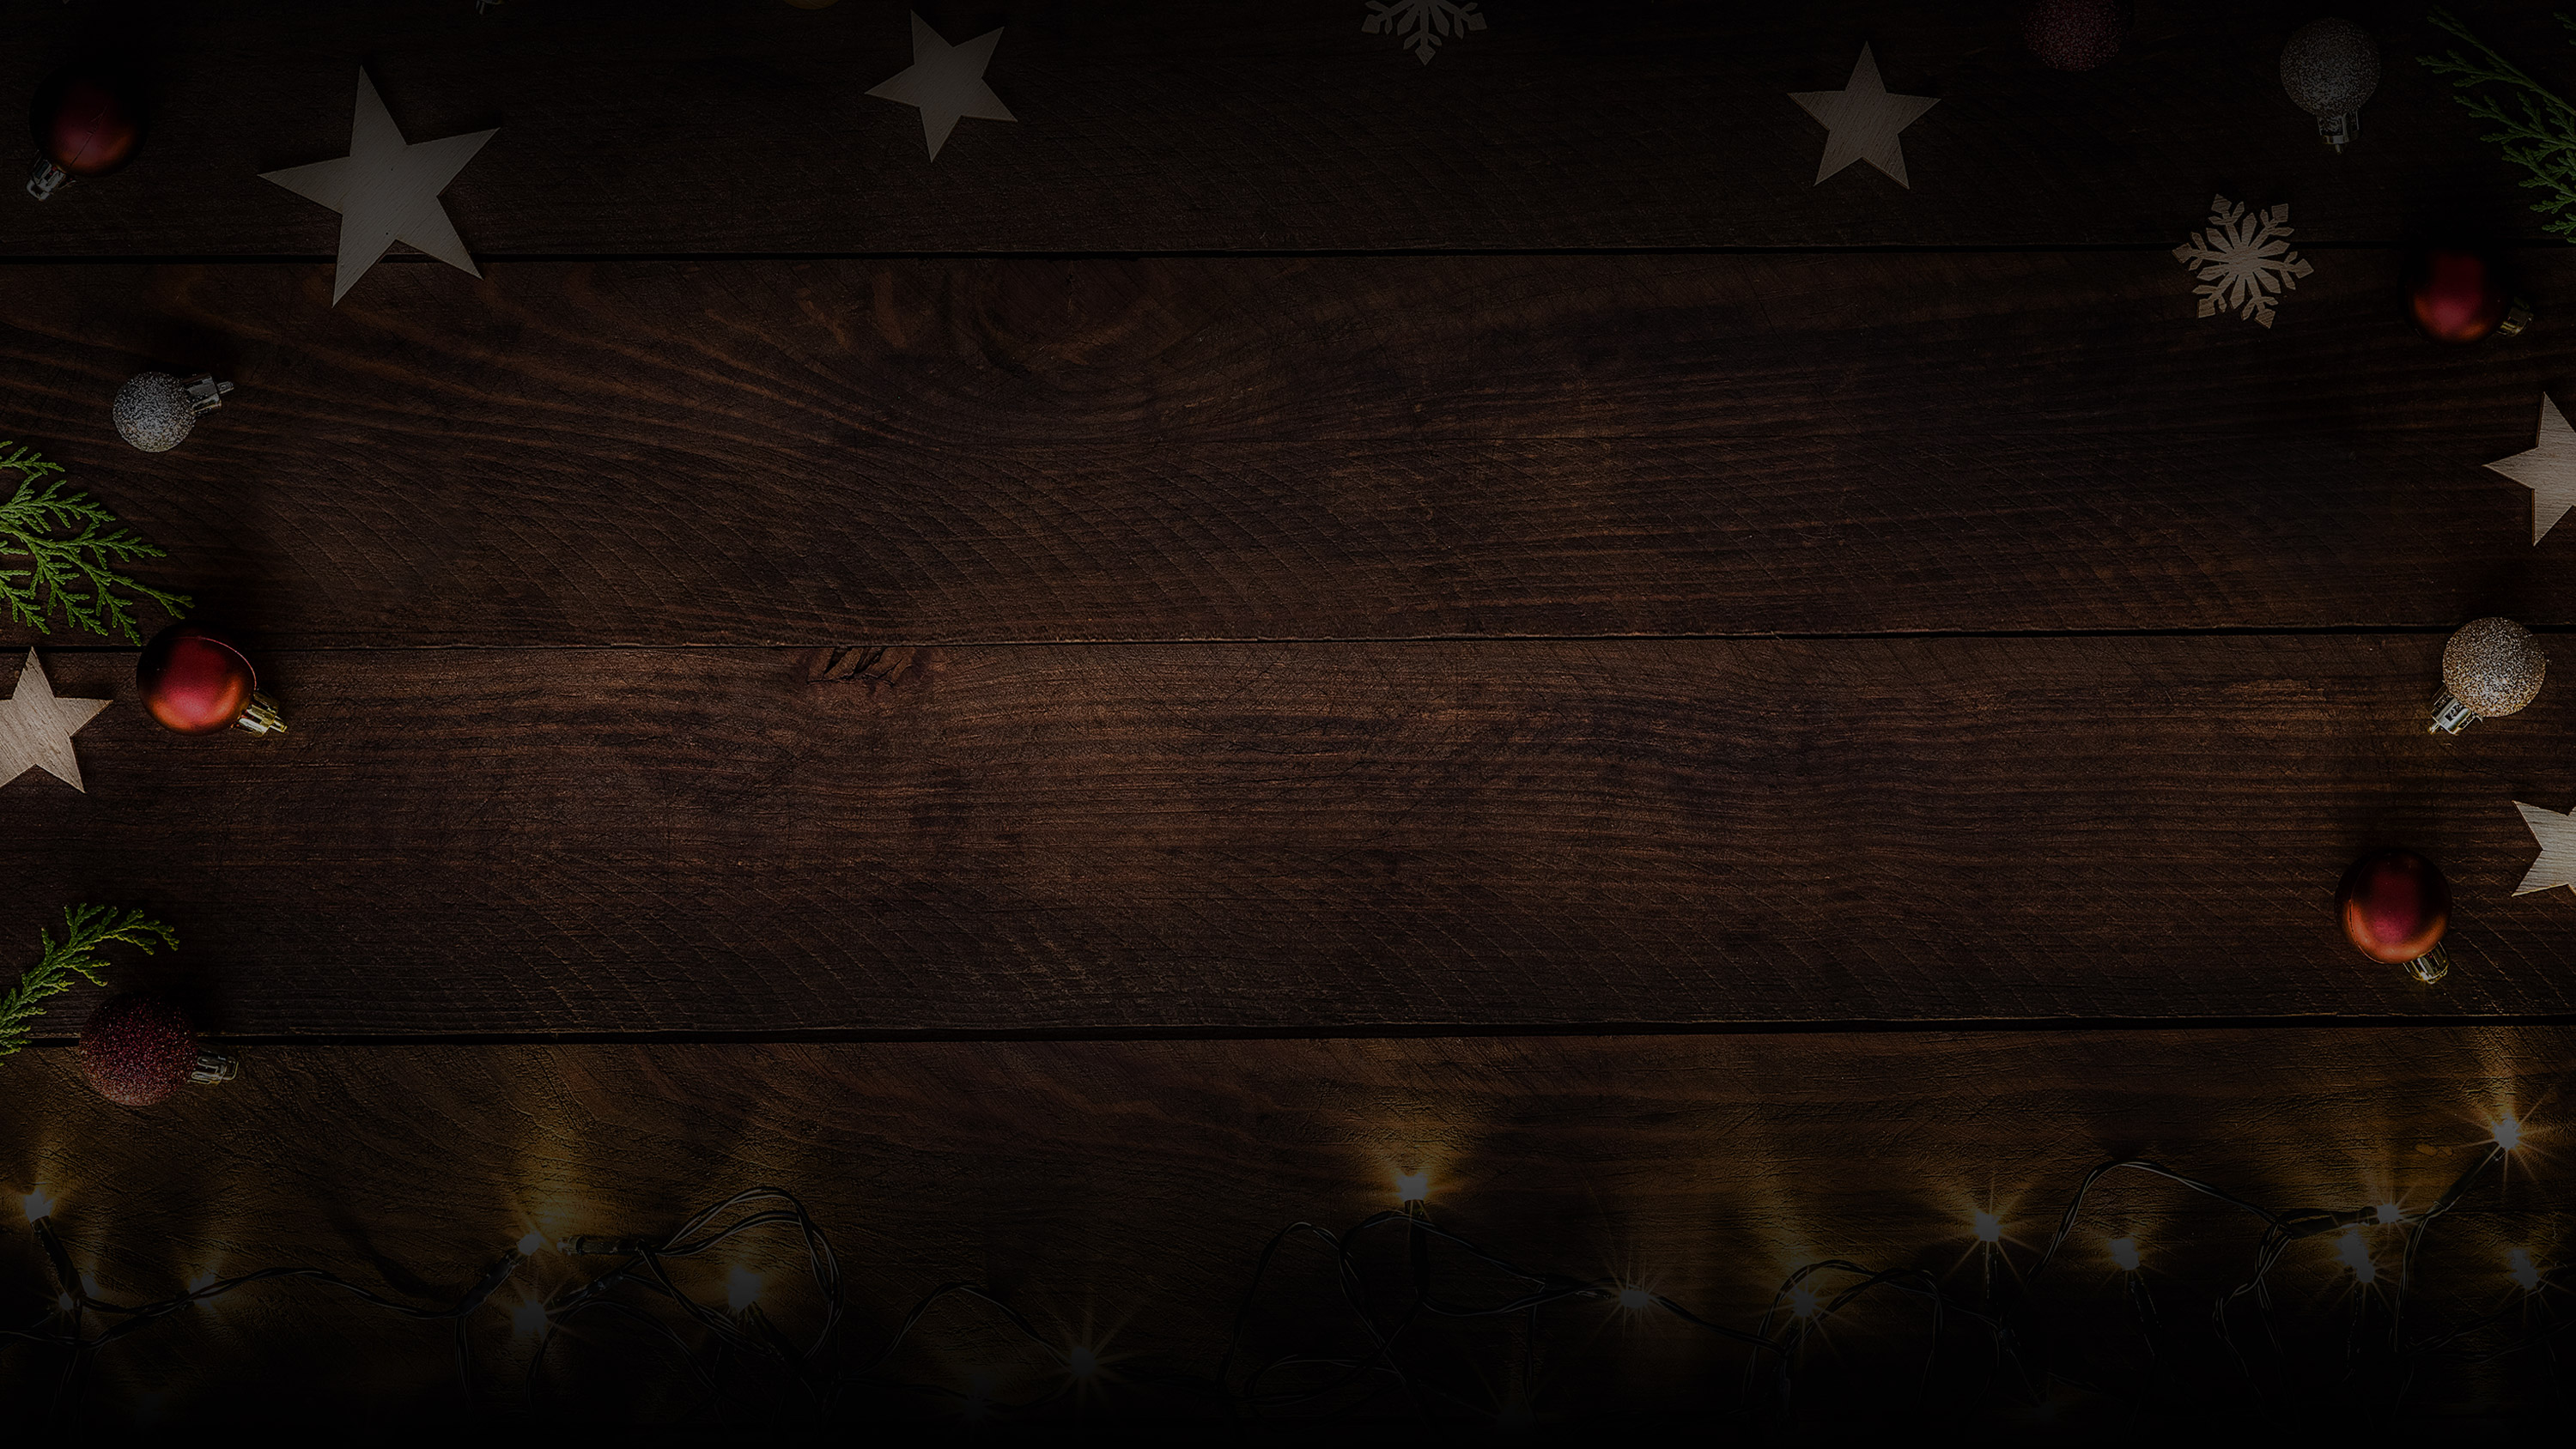 Background image of wooden surface with tree ornaments and stars framing it.